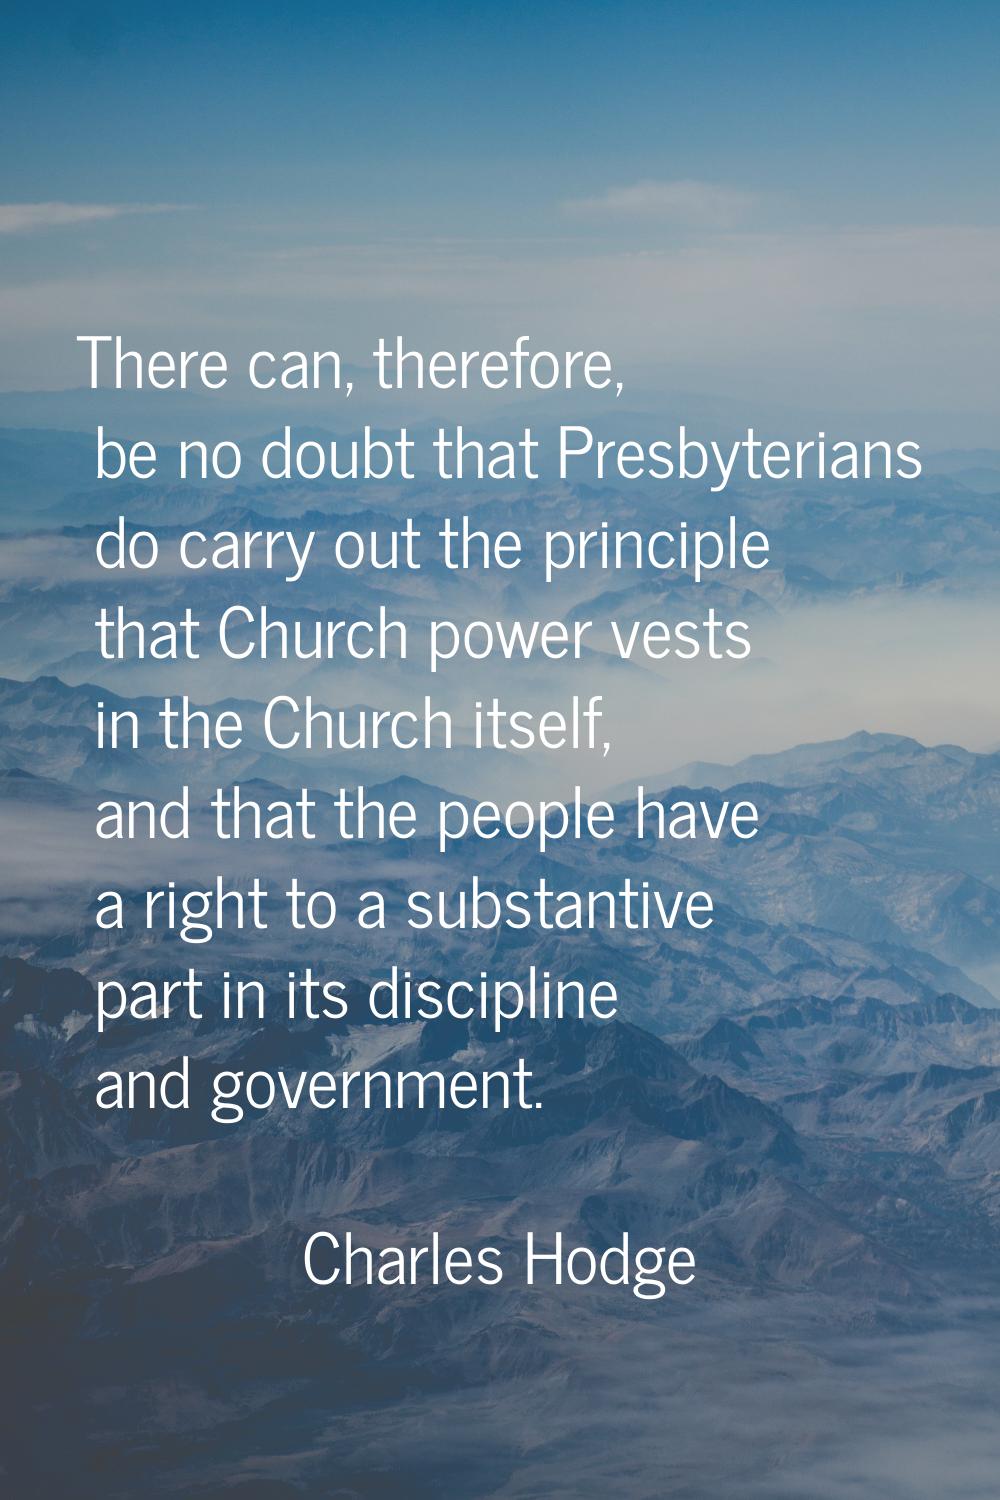 There can, therefore, be no doubt that Presbyterians do carry out the principle that Church power v